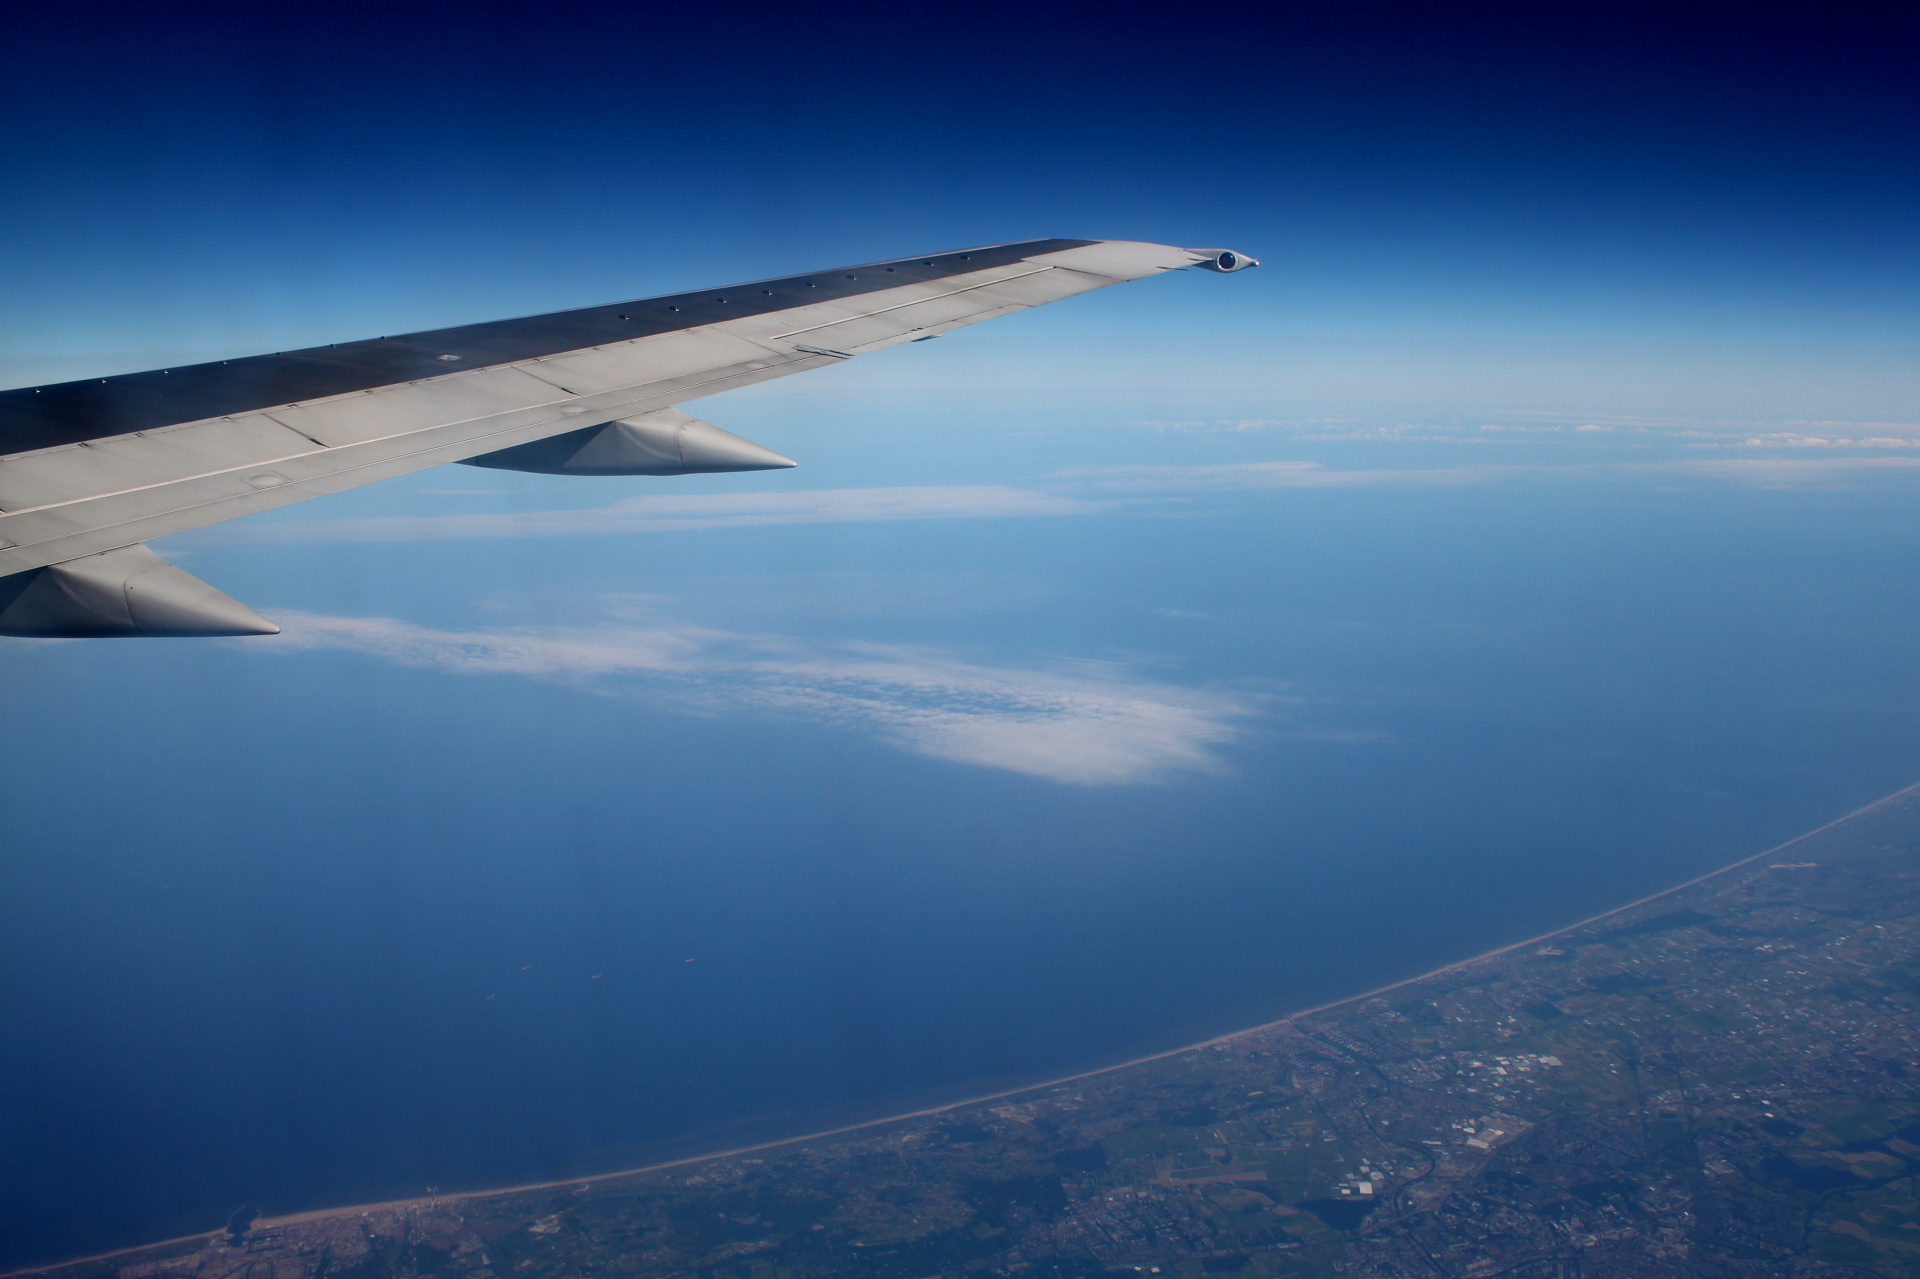 WAW-LHR: The Hague and North Sea (Travels » US Trip 3: The Roads Not Taken » The Flights)